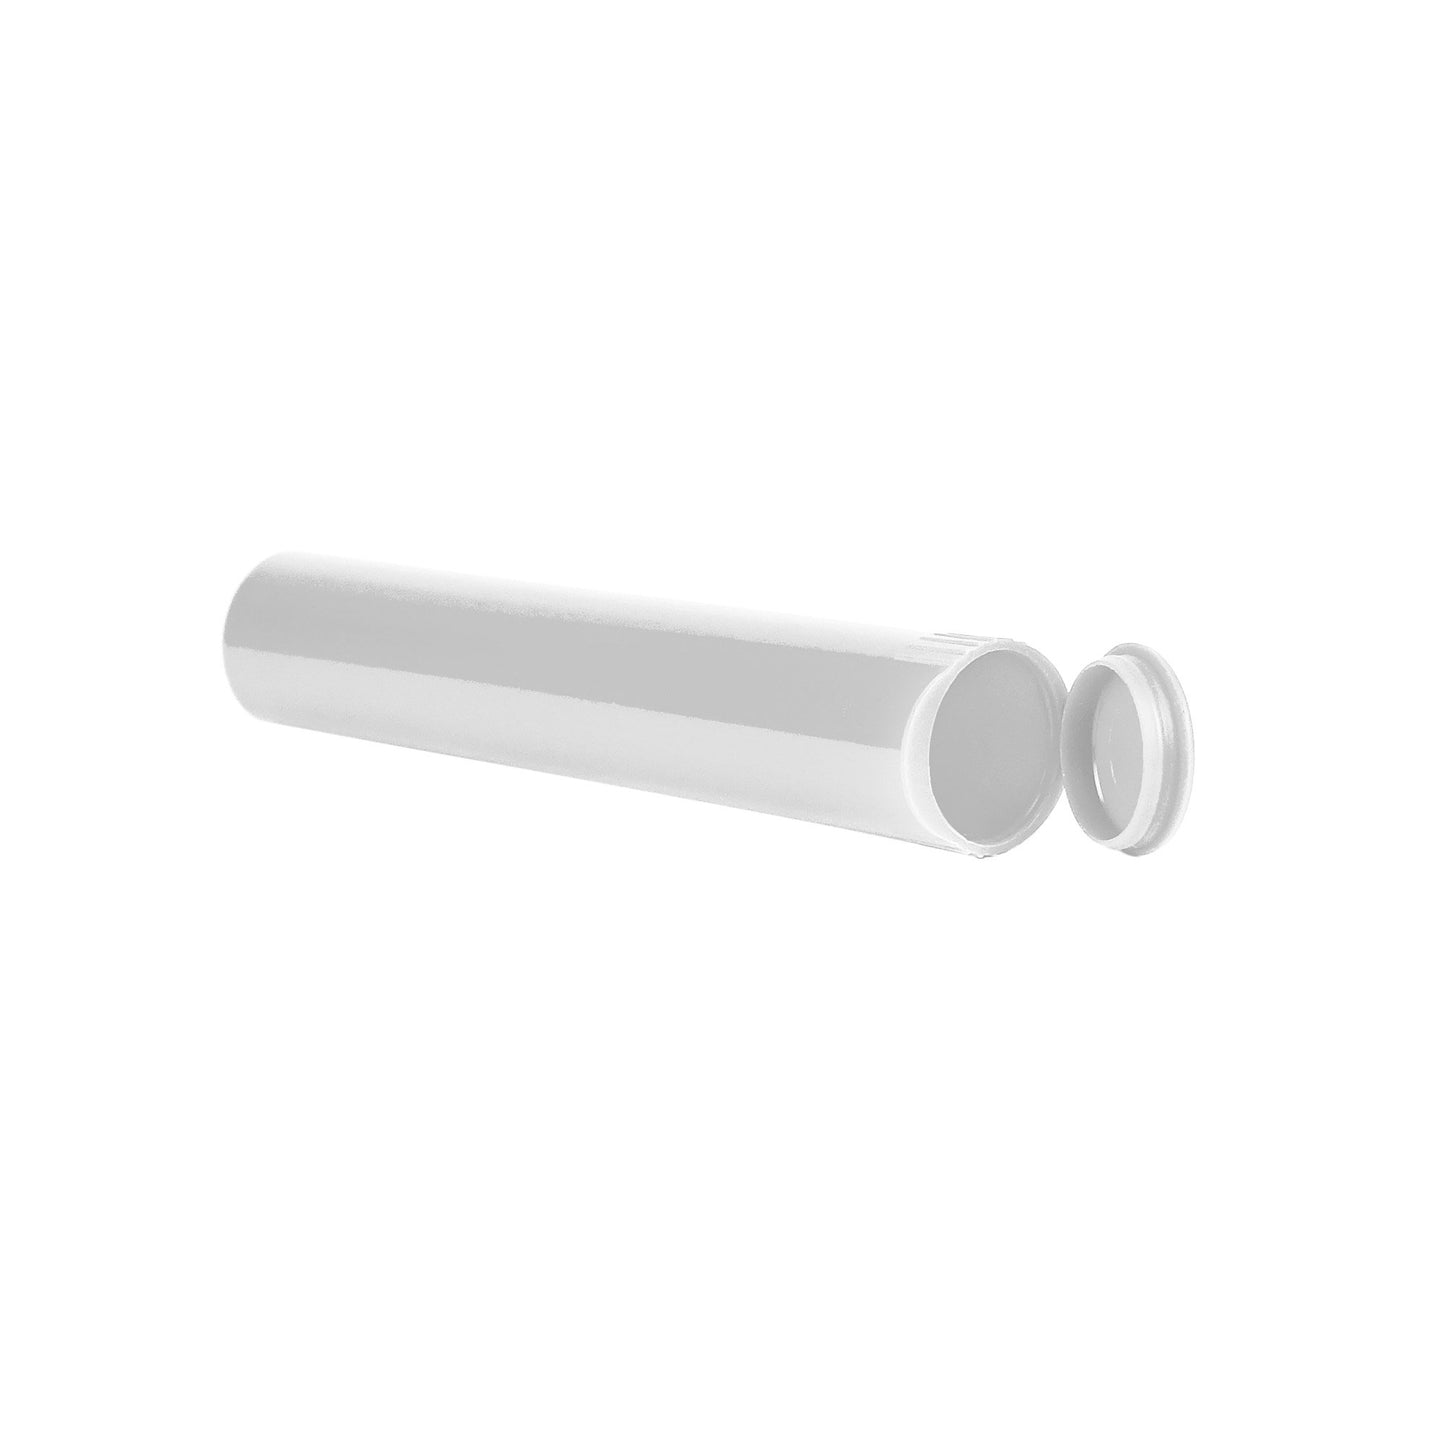 98mm Pre-Roll RX Squeeze Tubes Opaque White - 700 Count at Flower Power Packages